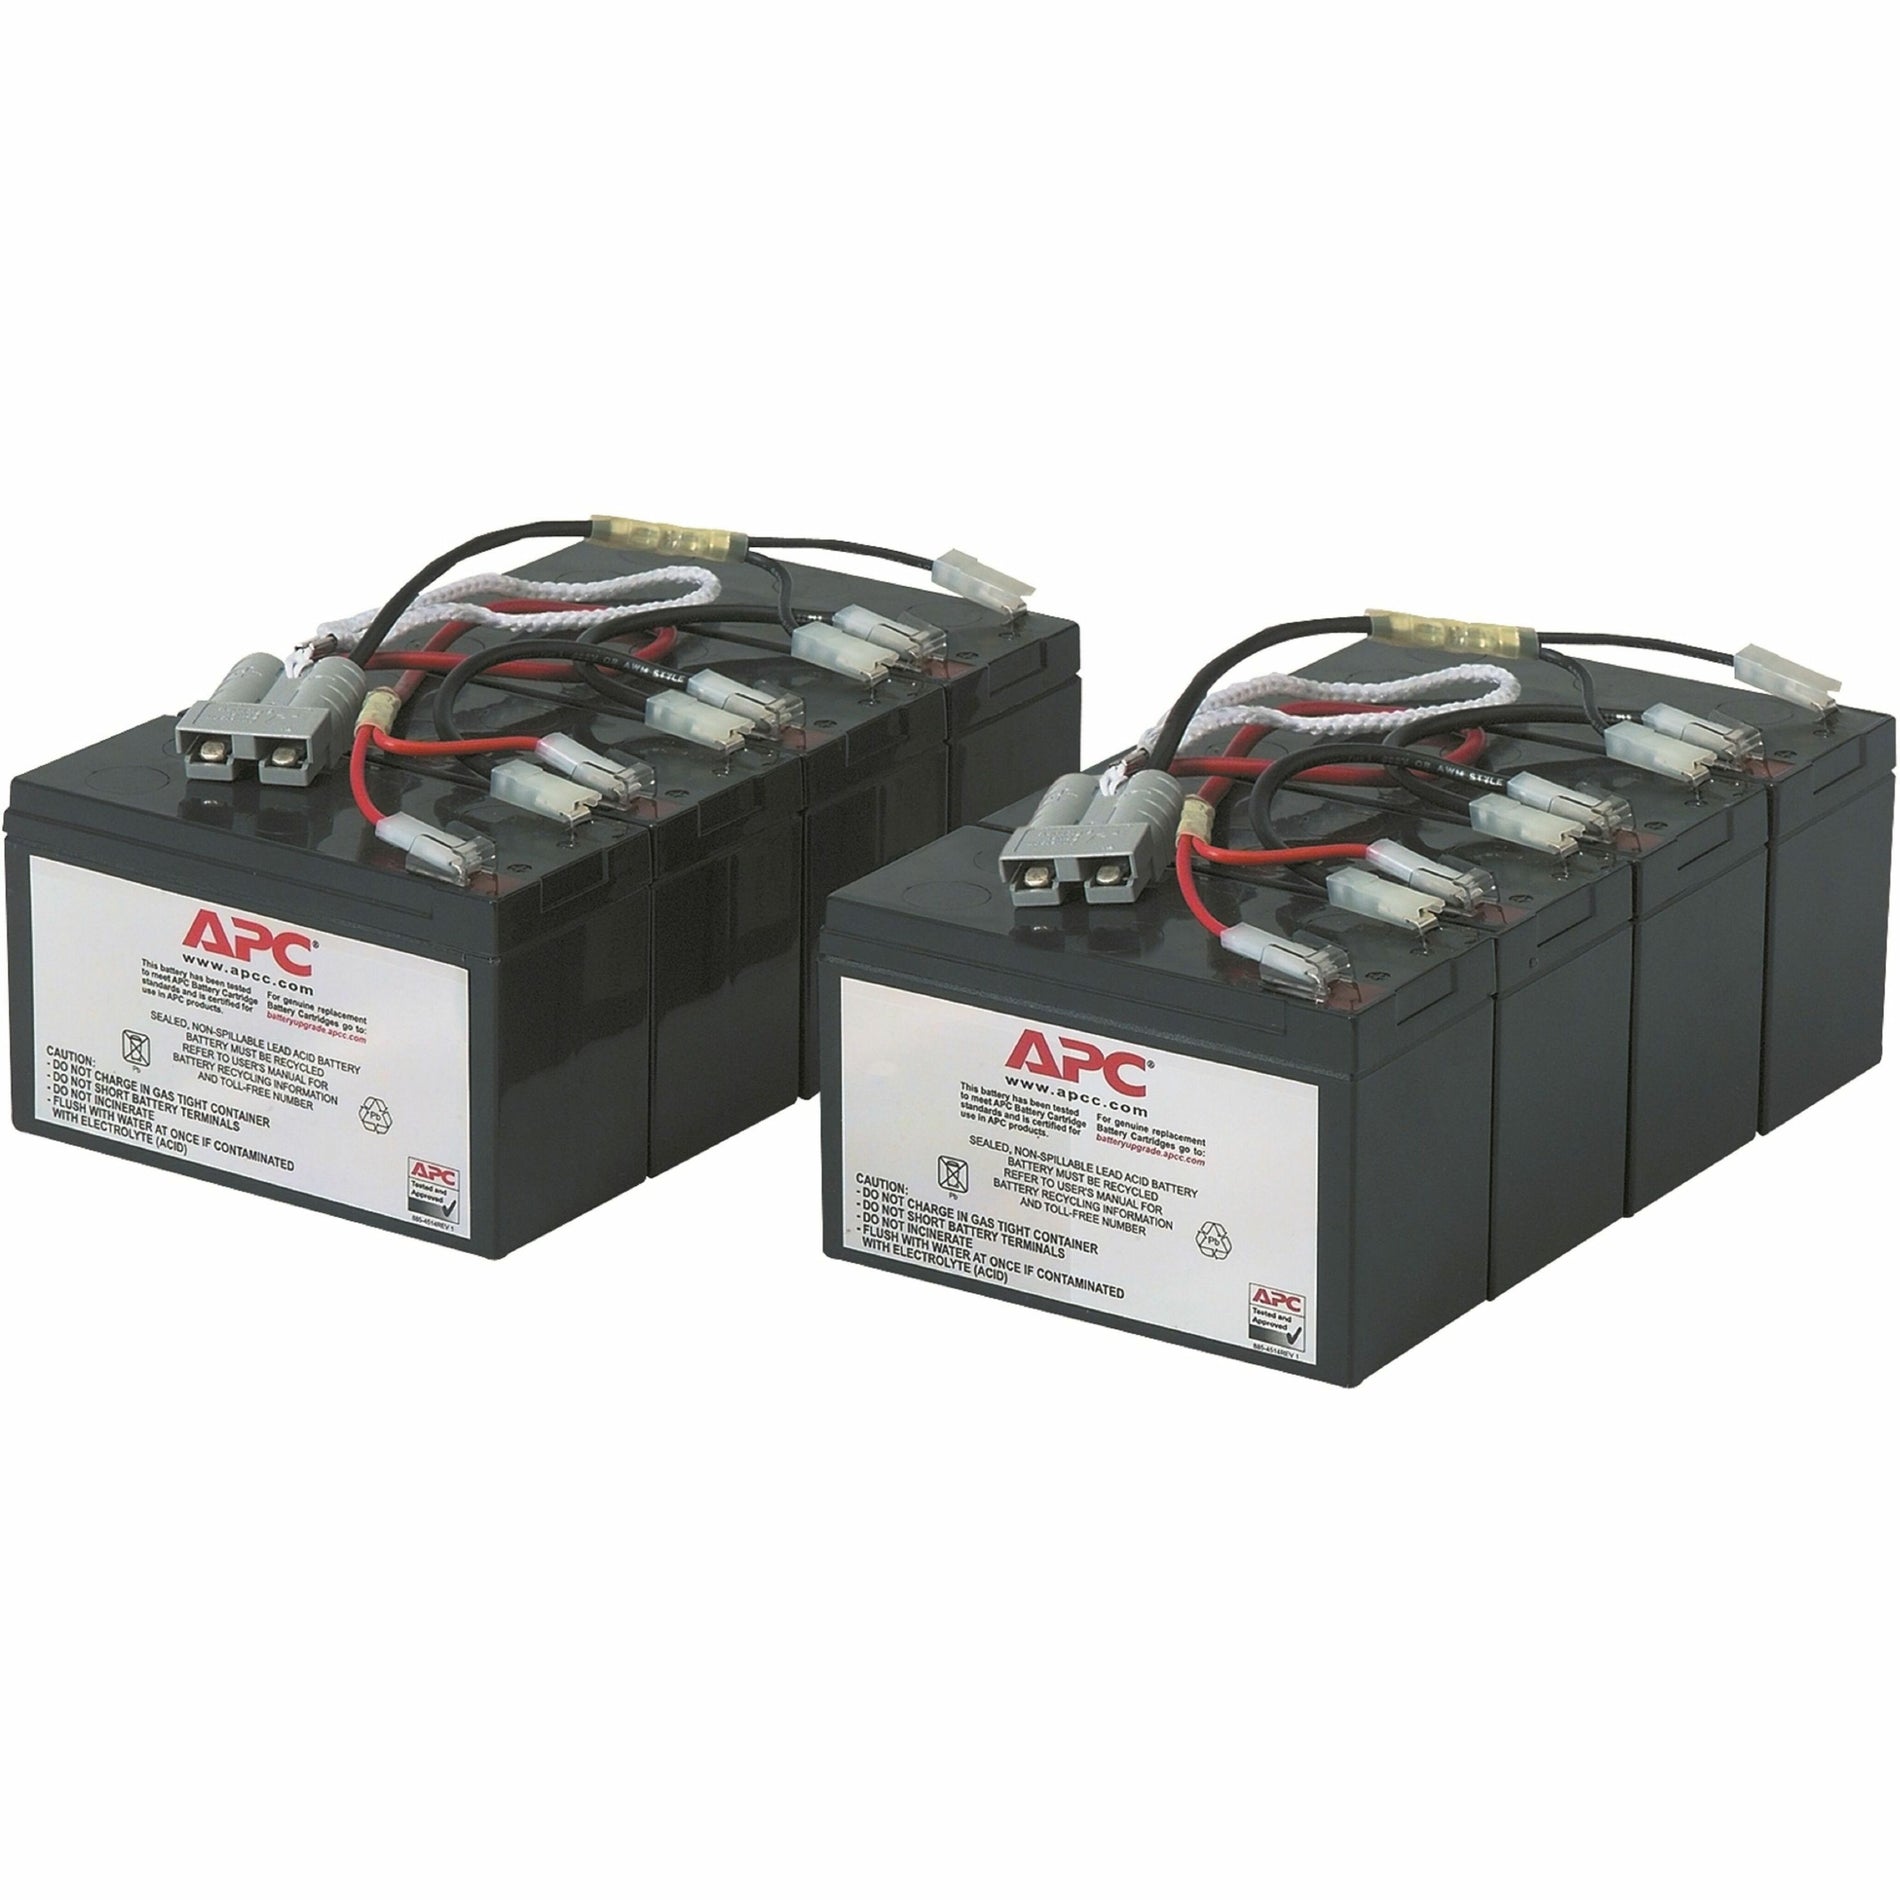 APC RBC12 Replacement Battery Cartridge #12, 2 Year Warranty, Hot Swappable, 12V DC, 7500mAh